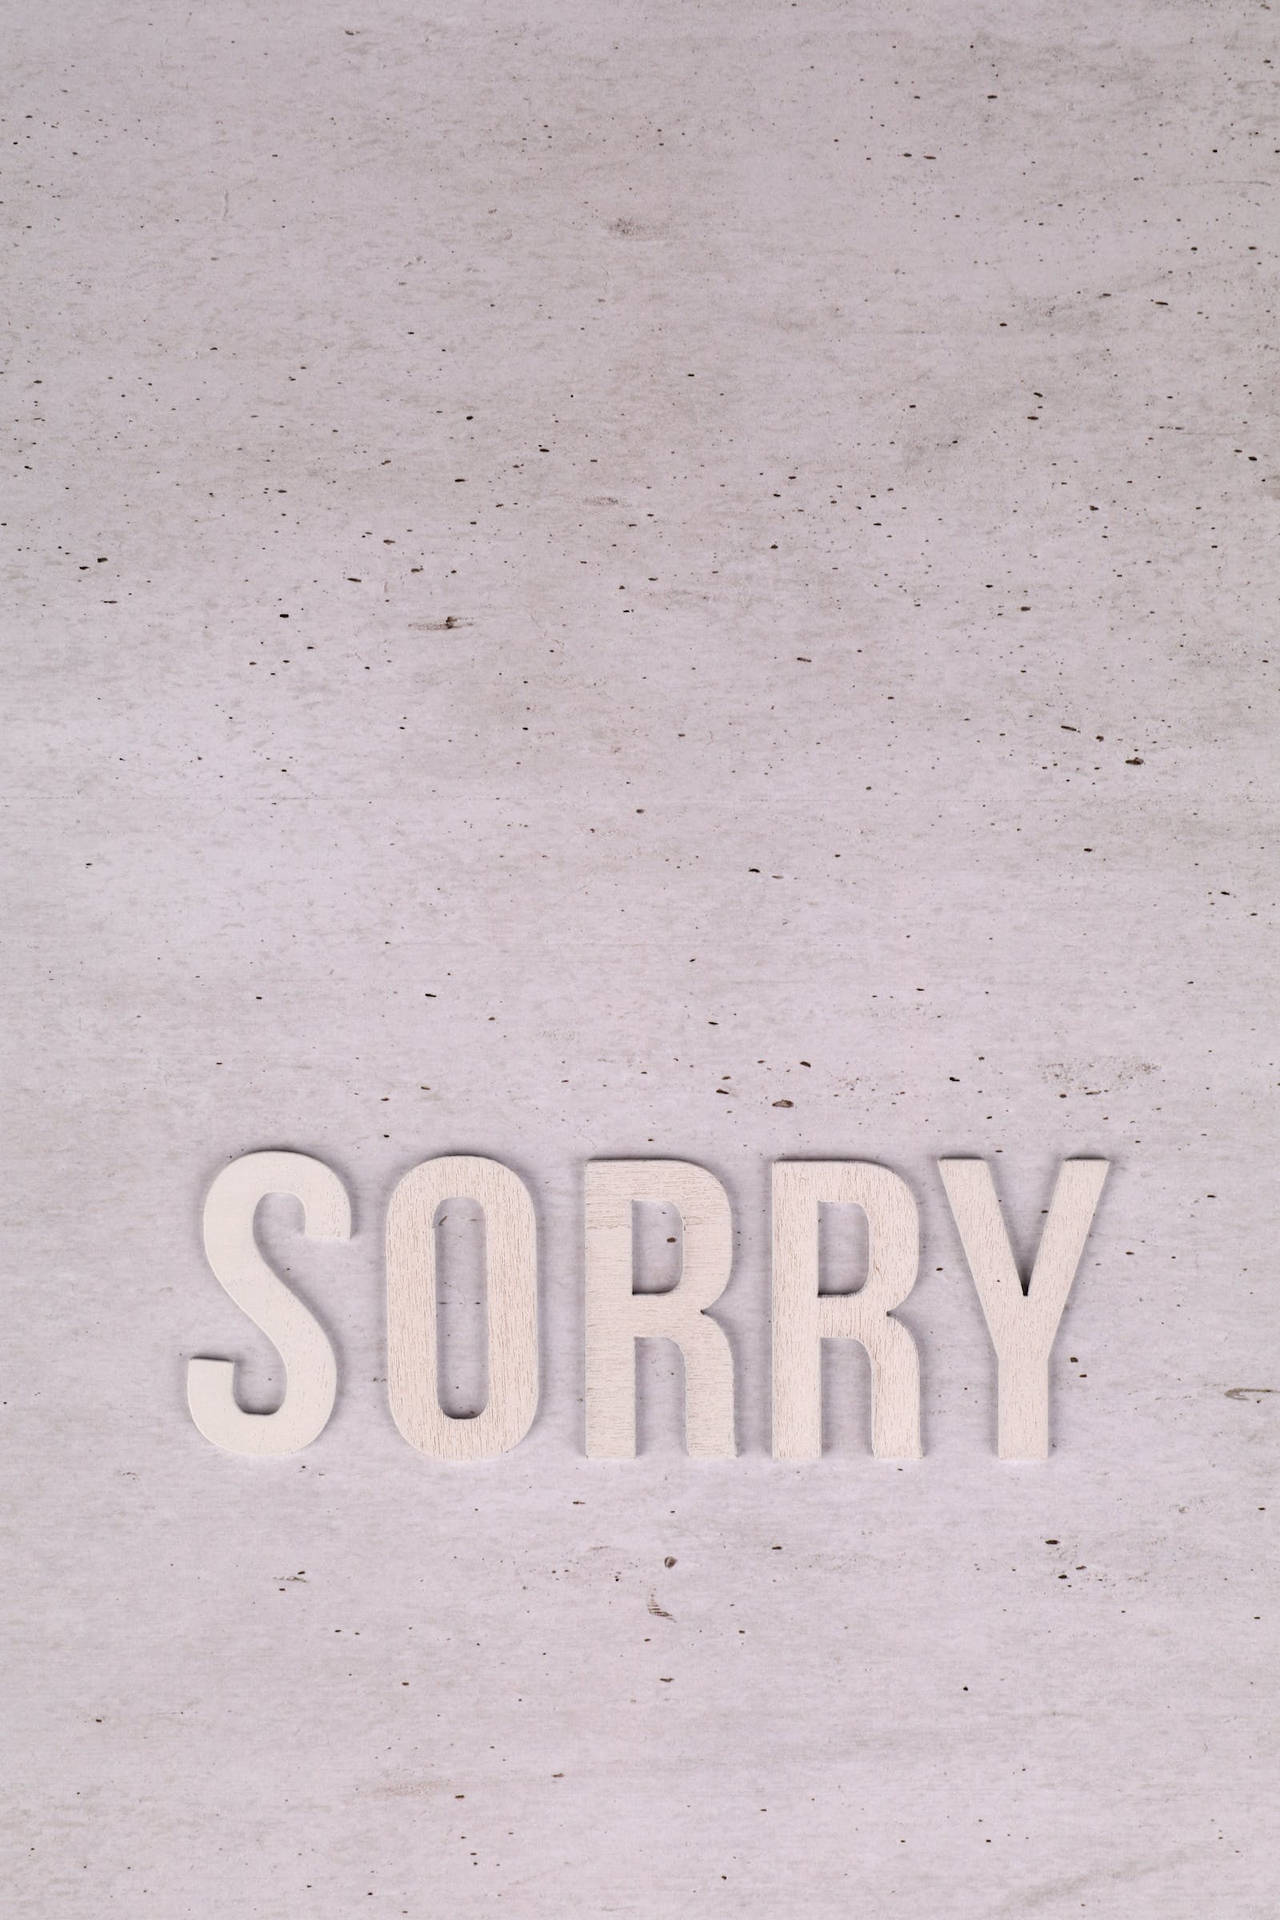 Im Sorry On A Cream Wall Wallpaper